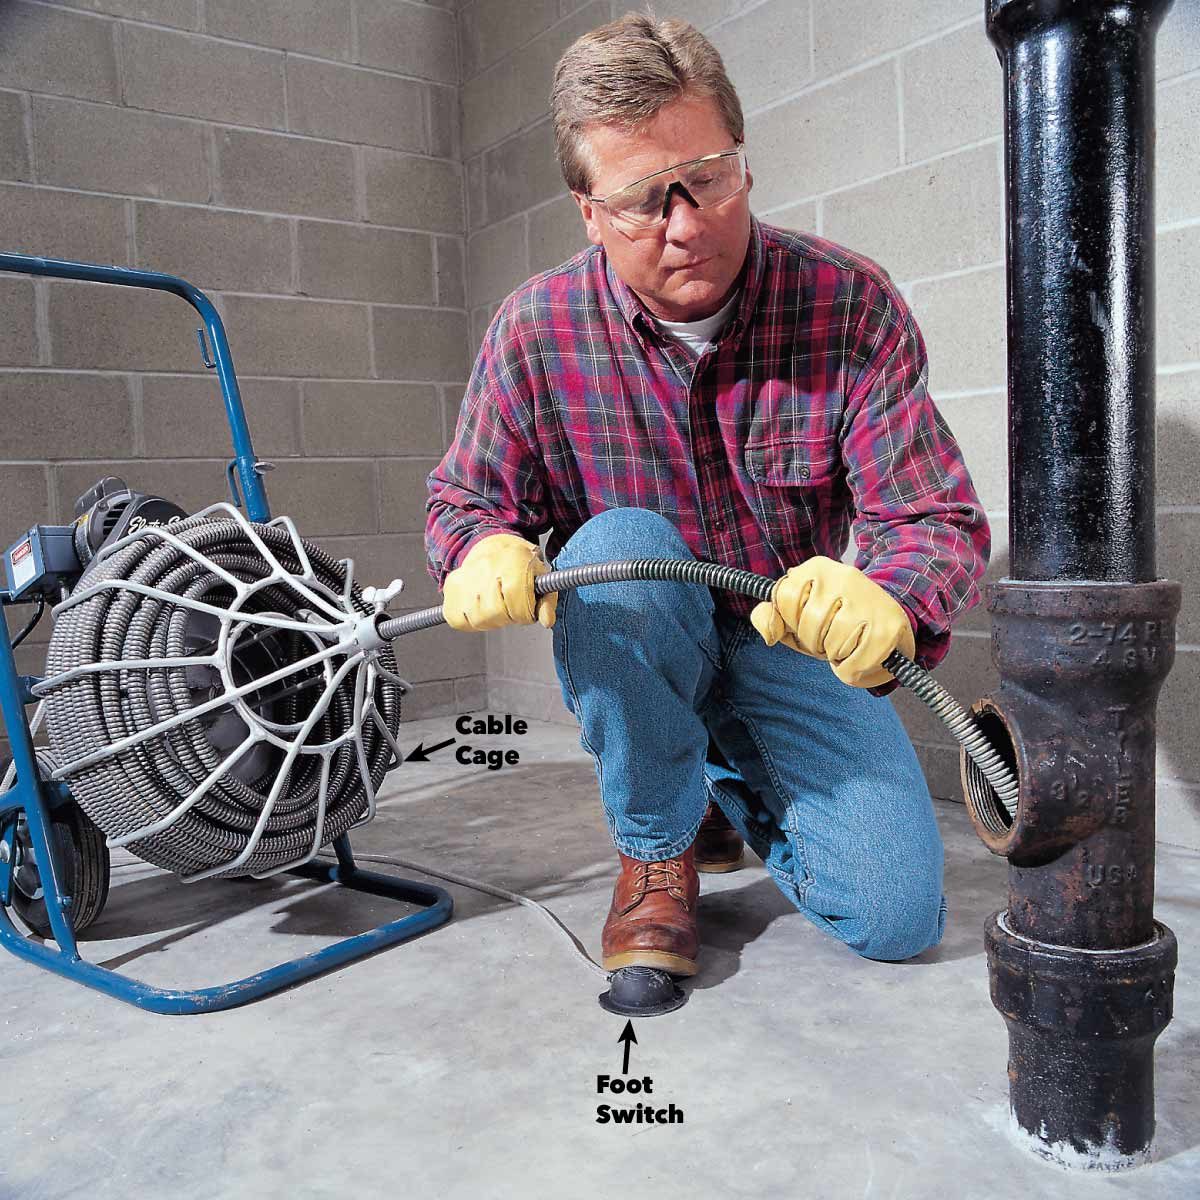 Basement Drain Backing Up? Here's How to Unclog It